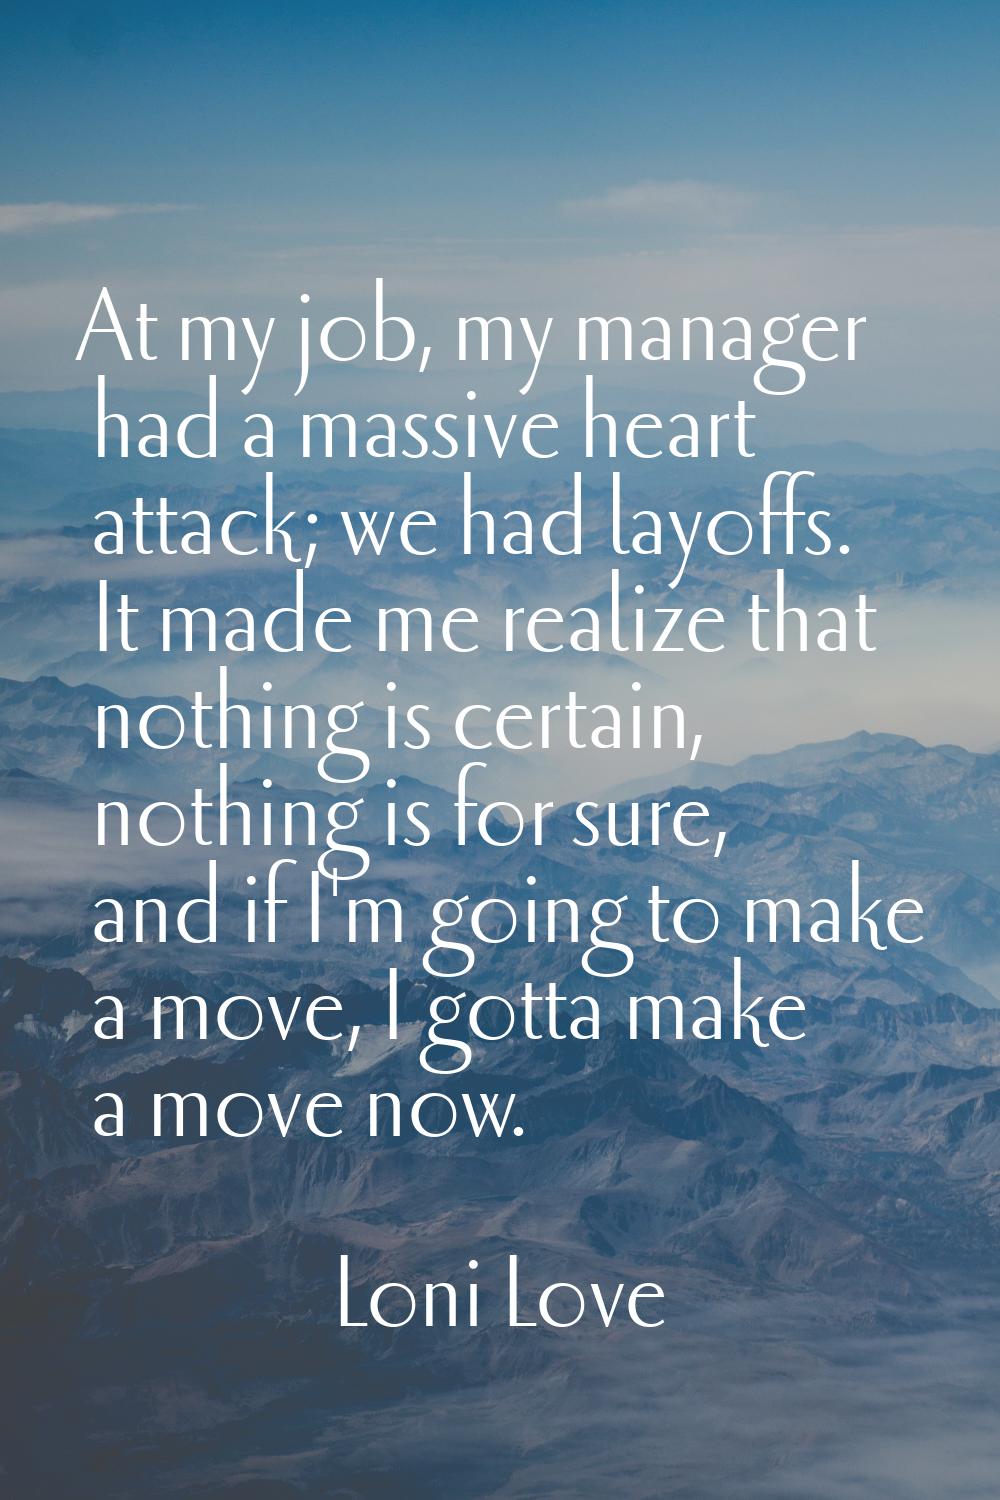 At my job, my manager had a massive heart attack; we had layoffs. It made me realize that nothing i